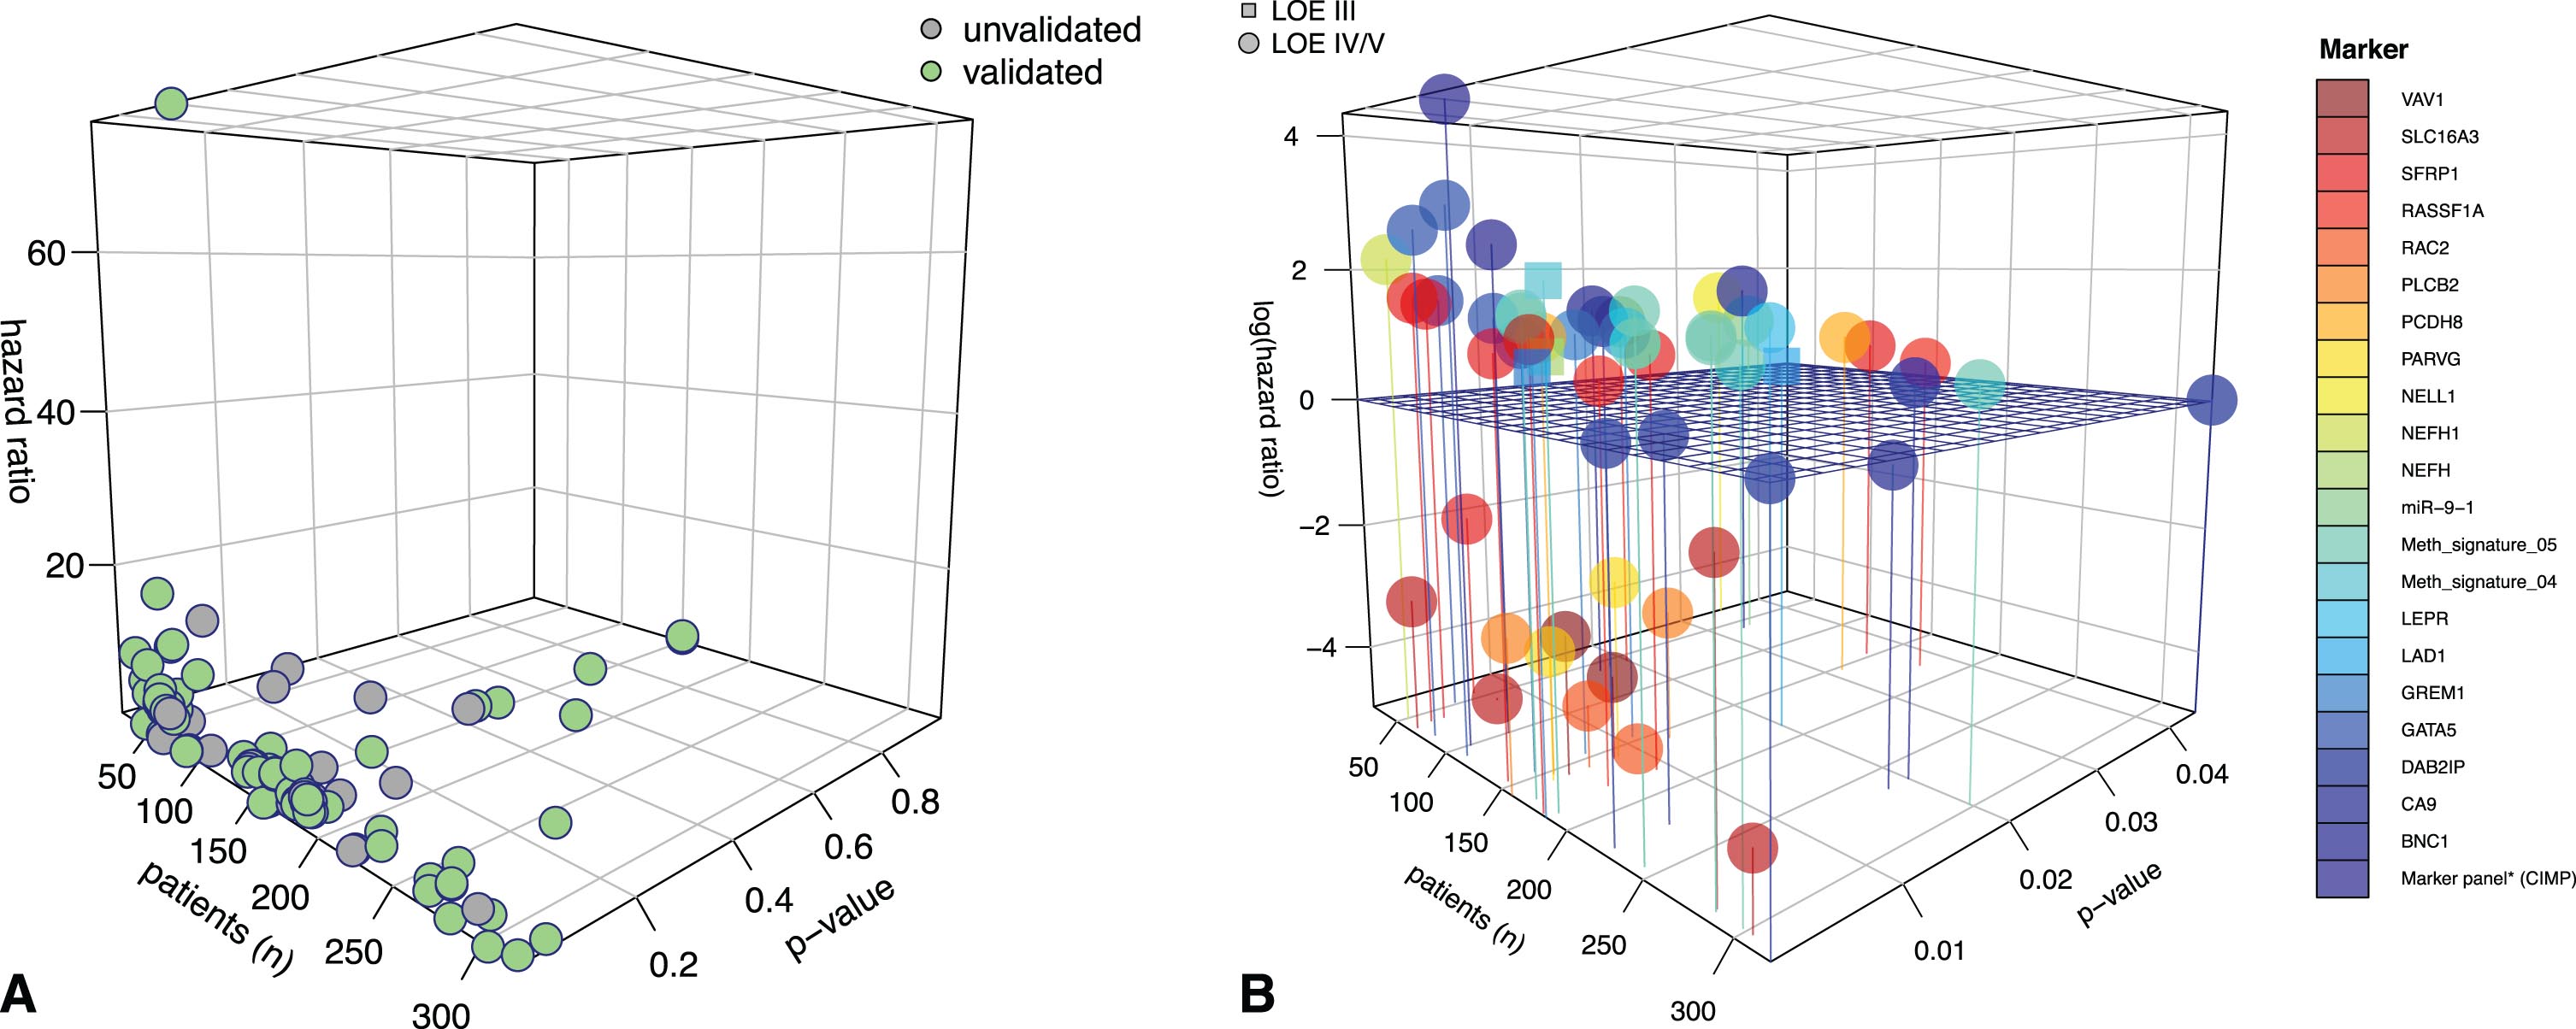 3D plots for visualization of the significance level of studies in terms of survival. A) 3D plot giving an overview of all publications on epigenomic markers in renal cell carcinoma (RCC). As expected, a large number of studies had relatively low patient numbers, often resulting in an overemphasized hazard rate for the outcome variable. The green dots () indicate studies with internally or externally validated results. Grey dots represent data with no validation (). For this review, we focused on validated data. B) 3D plot with a closer look at validated studies with p values reaching the significance level and color-coded marker representations. The horizontal grid separates hazard ratios by ≤ and >1. As can be seen, most methylation markers are associated with an unfavorable effect on patient hazard. For the z-axis (hazard ratio), a logarithmic scale was used to better visualize values with hazard ratios of ≤1. LOE = level of evidence. Circles represent studies with LOE IV/V (∘), and squares represent studies with LOE III (□). Definitions of the different LOEs are given in the material and methods section.